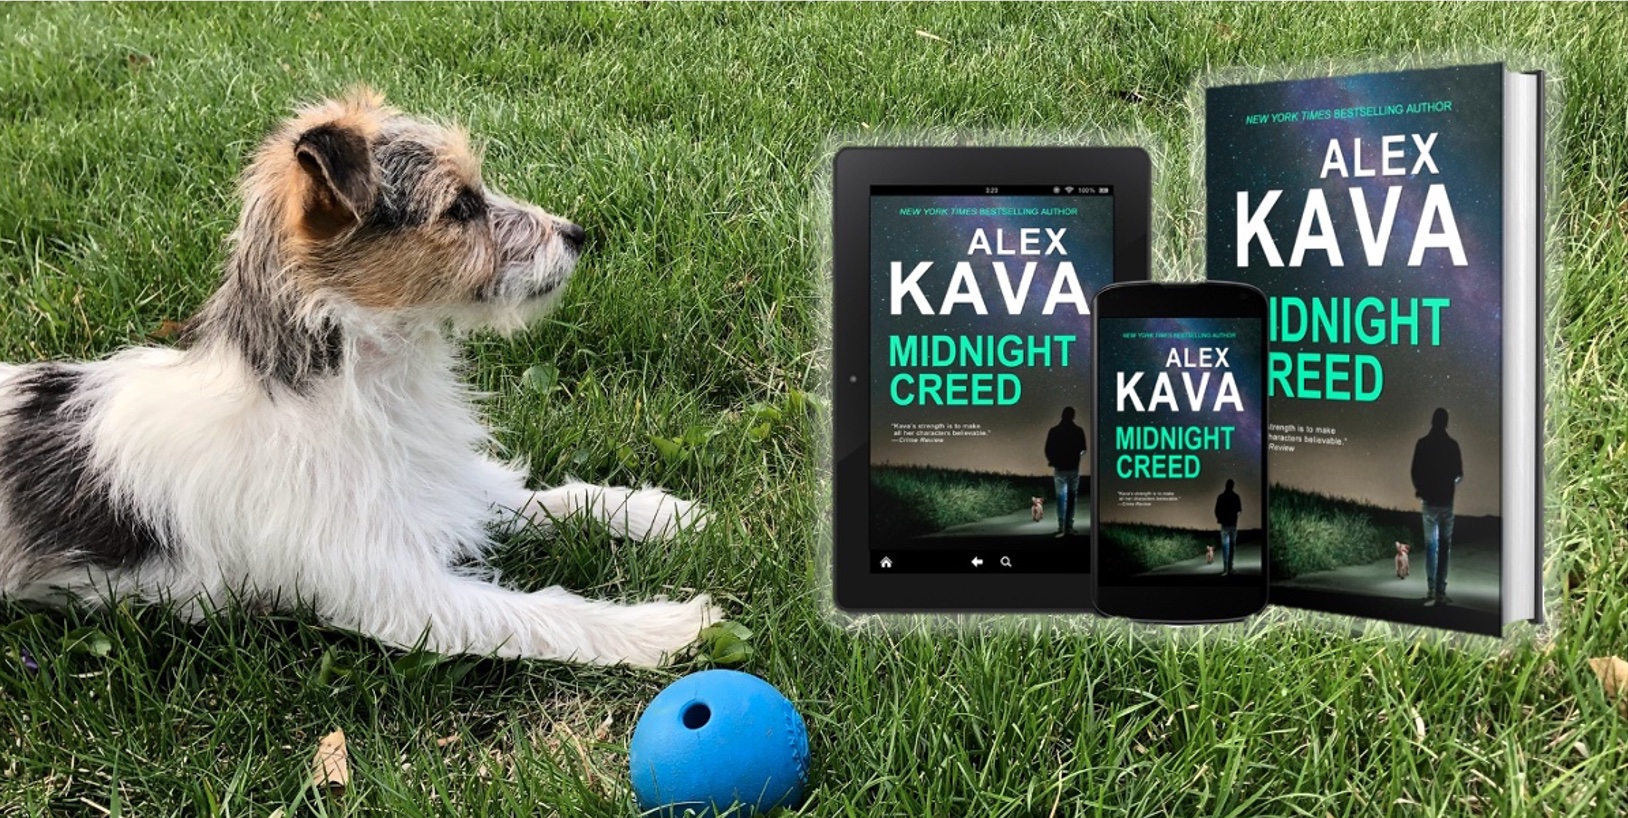 Alex Kava's new novel MIDNIGHT CREED and her pup GRACE.